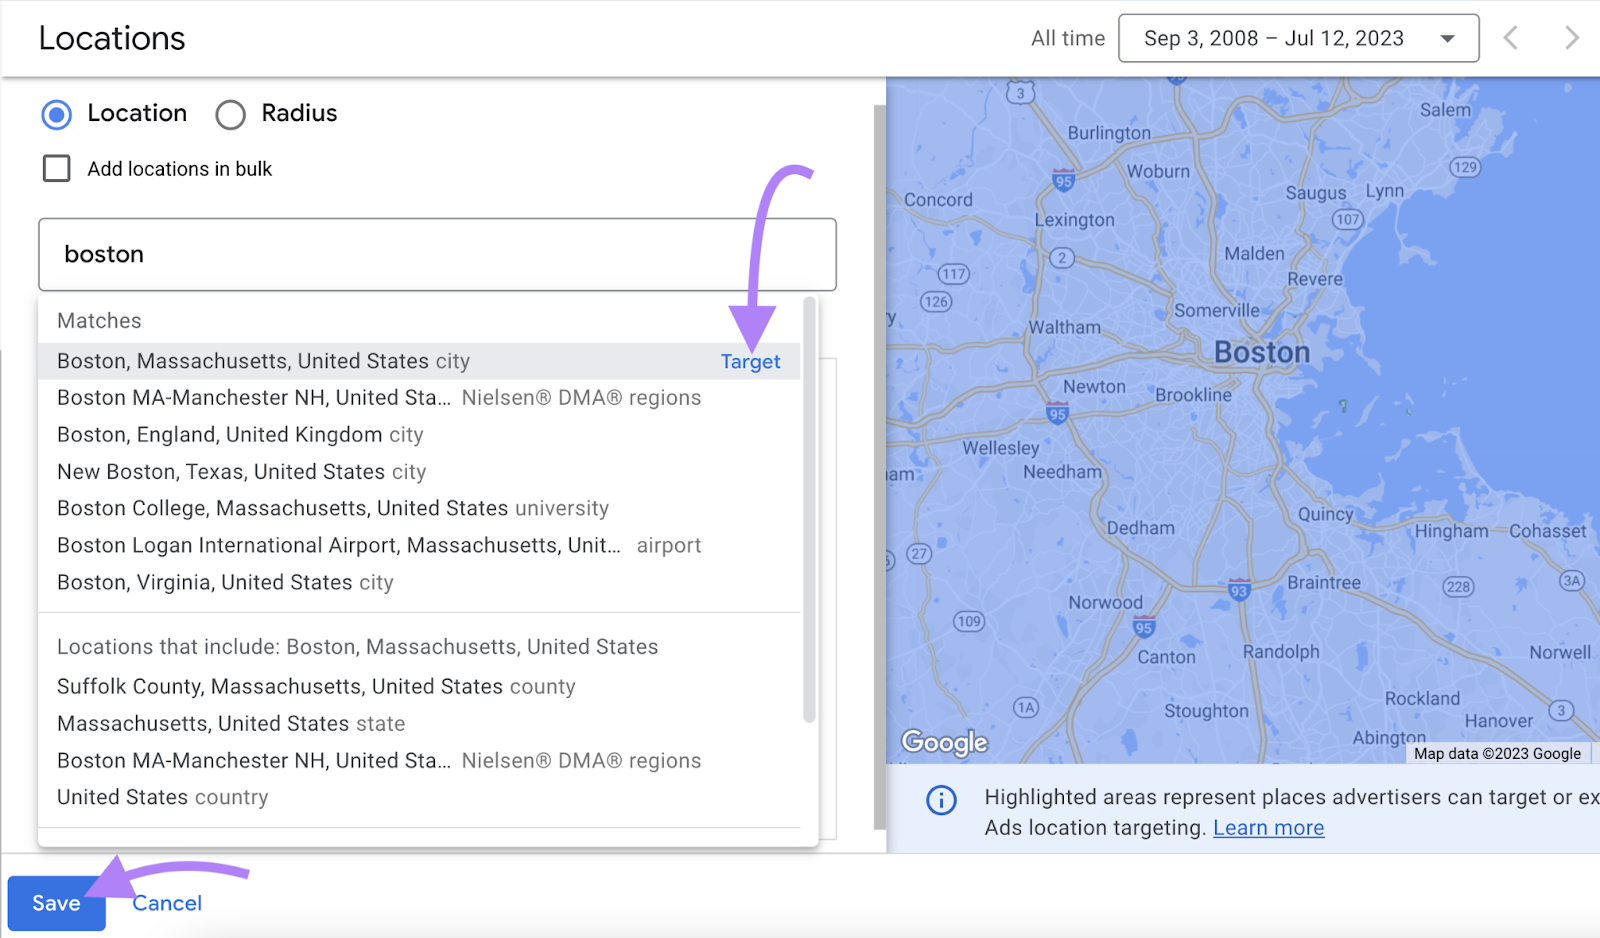 example of setting Boston as the location you’d like to target with your ads